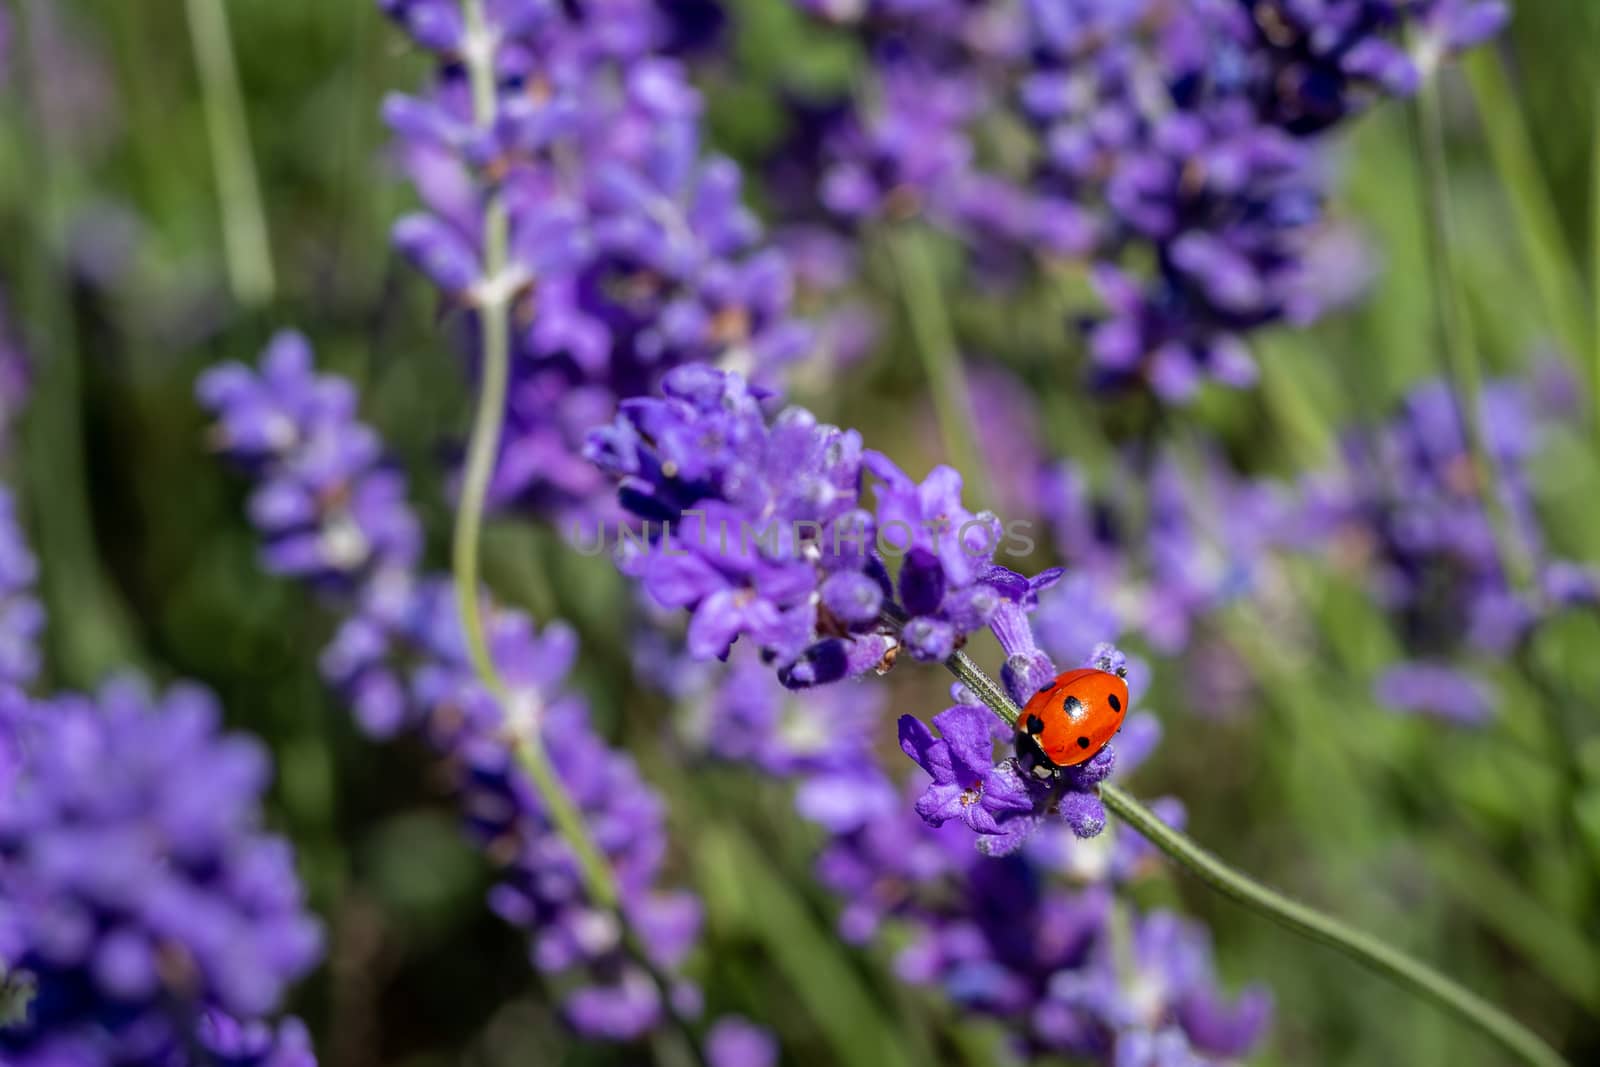 Seven spot ladybird on a lavender plant by magicbones